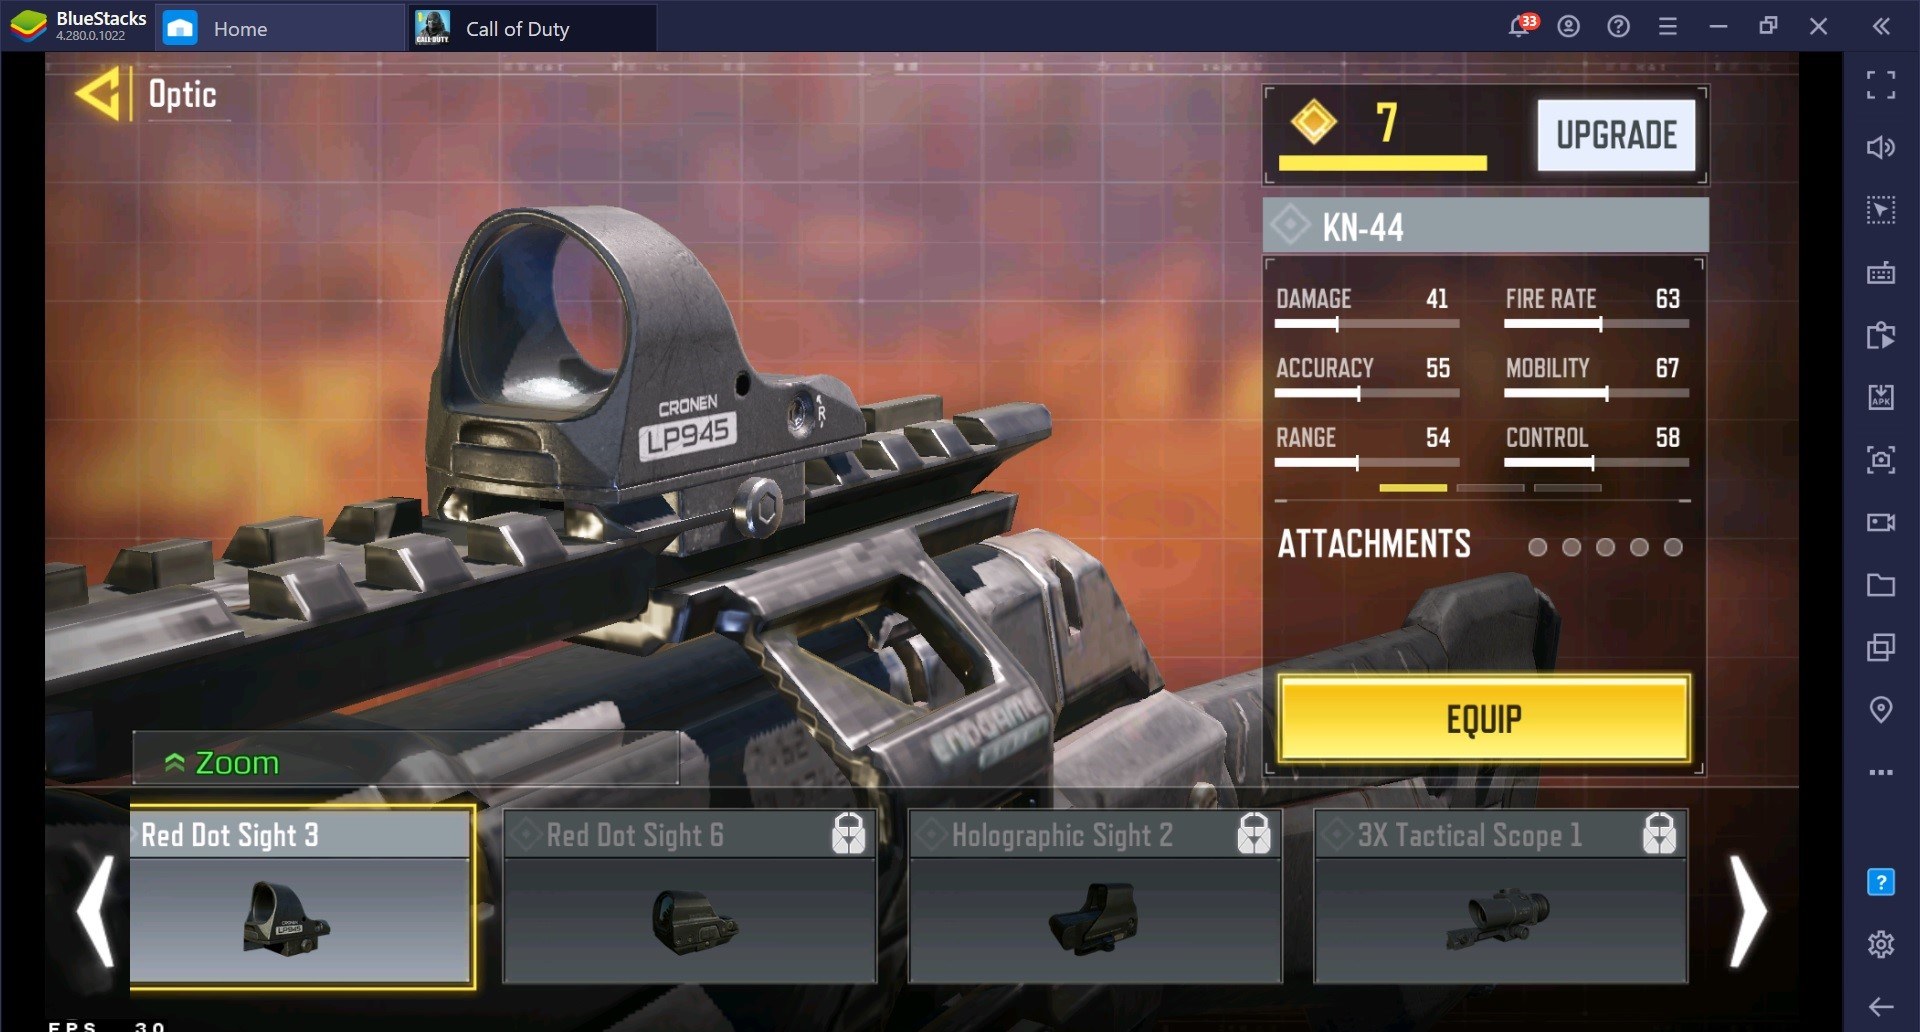 Call of Duty: Mobile Game Guide - Learn How to Dominate the Platform and KN-44